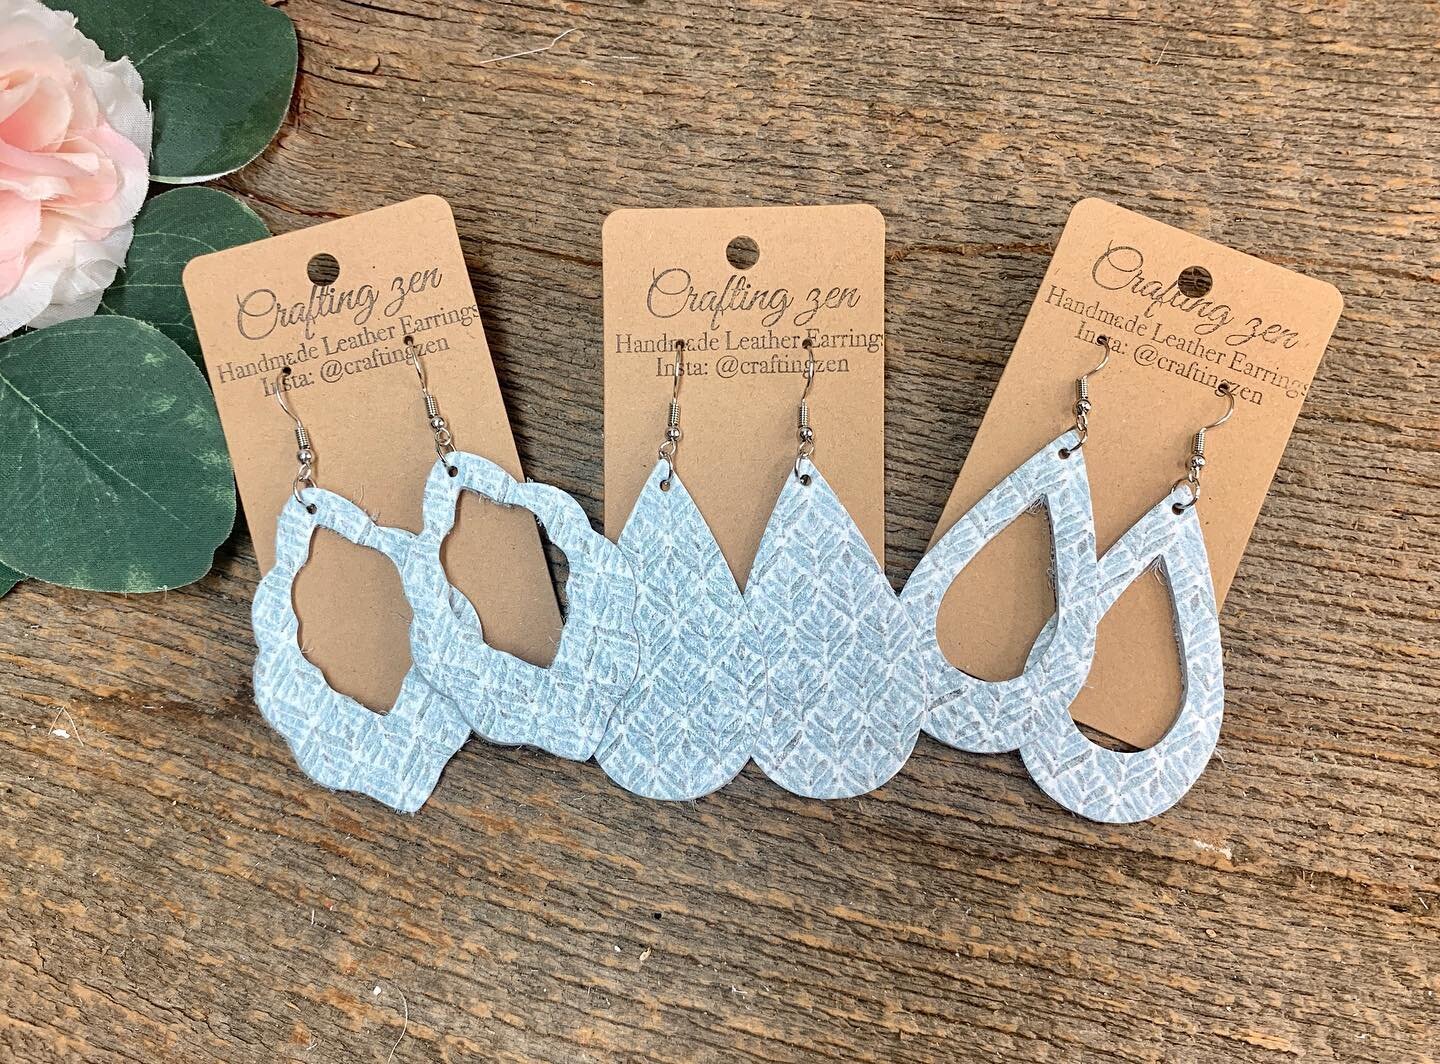 Zoom on this leather. So soft and sweet. Love it in the scalloped oval. Serenity tear drops and scalloped oval. Pretty with all hair color and sends out a restful summer vibe.

www.craftingzenleather.com

#craftingzenleather #earrings #armstrongjewel